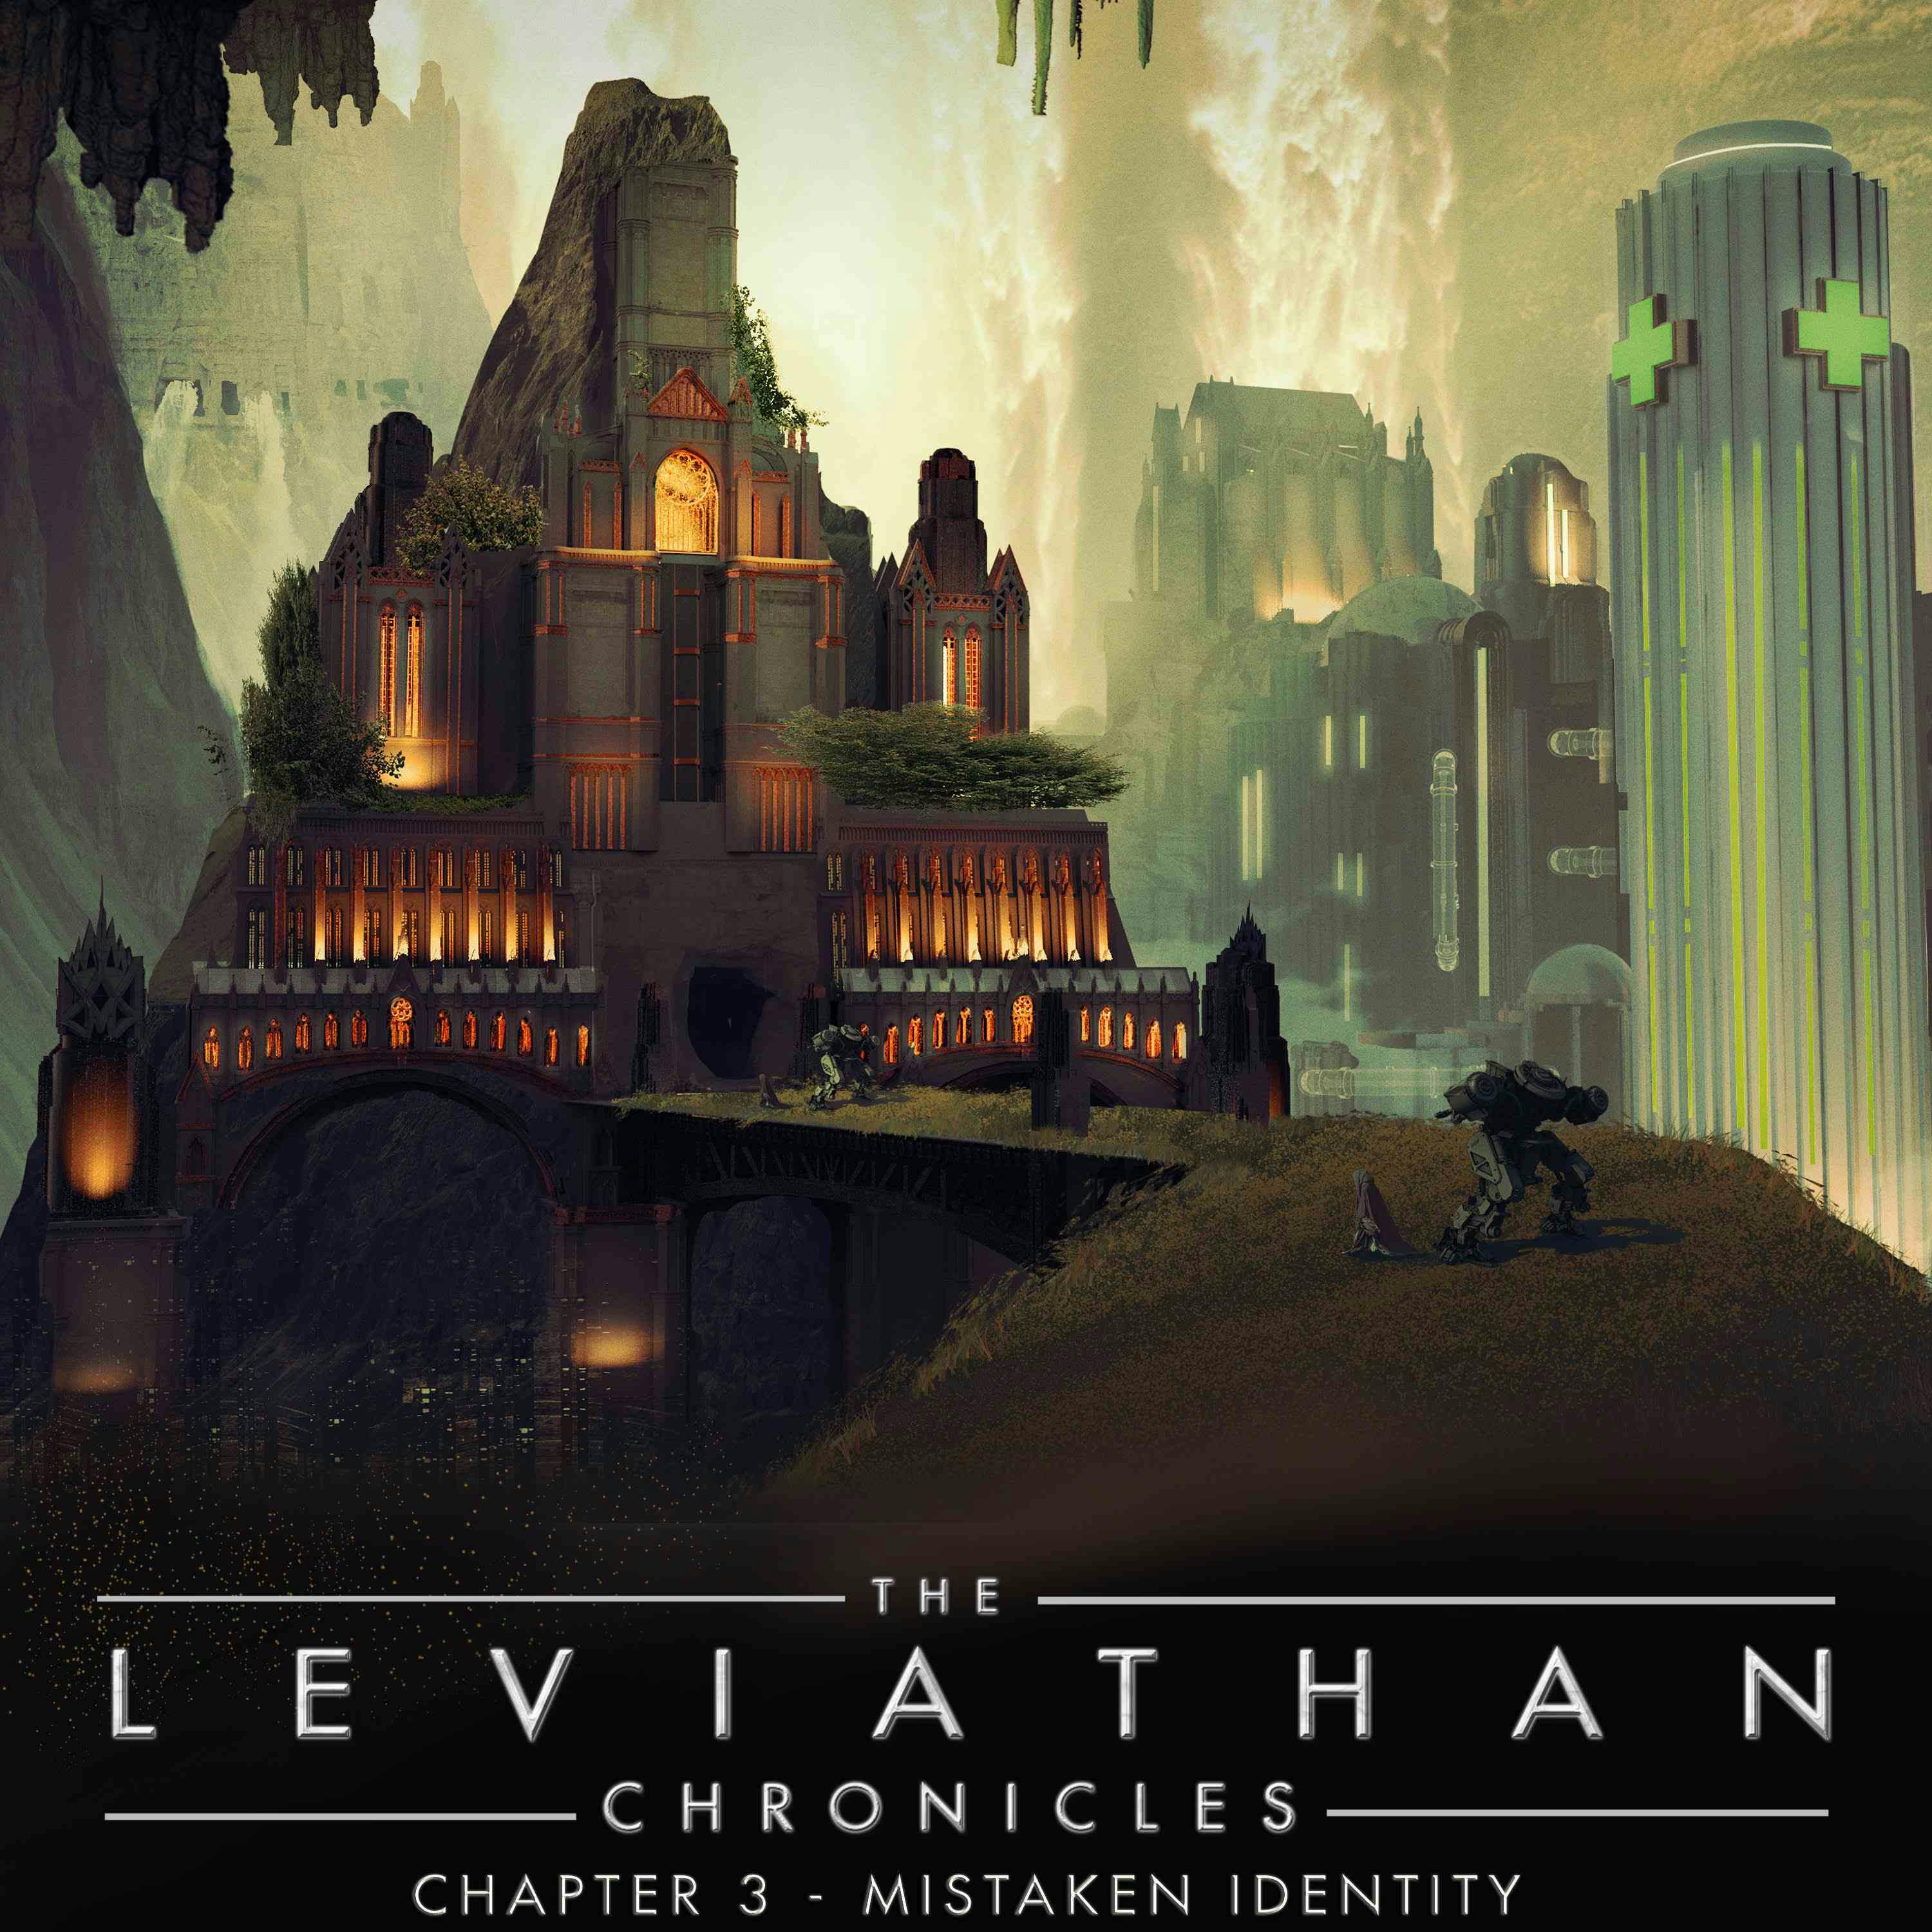 The Leviathan Chronicles | Chapter 3 - Mistaken Identity